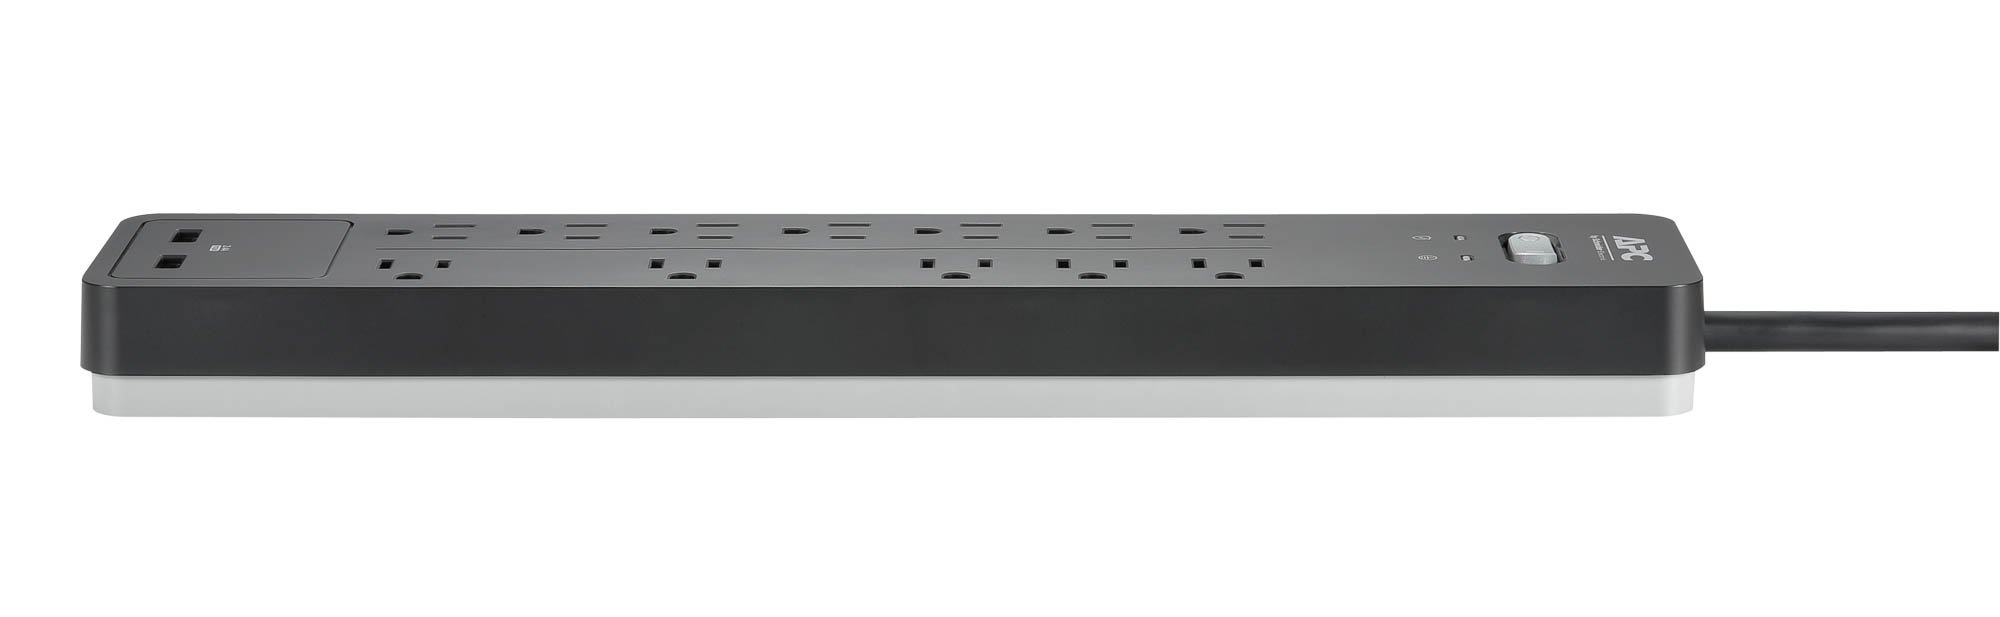 APC Surge Protector Power Strip with USB Charging Ports, PH12U2, 2160 Joules, Flat Plug, 12 Outlets Black